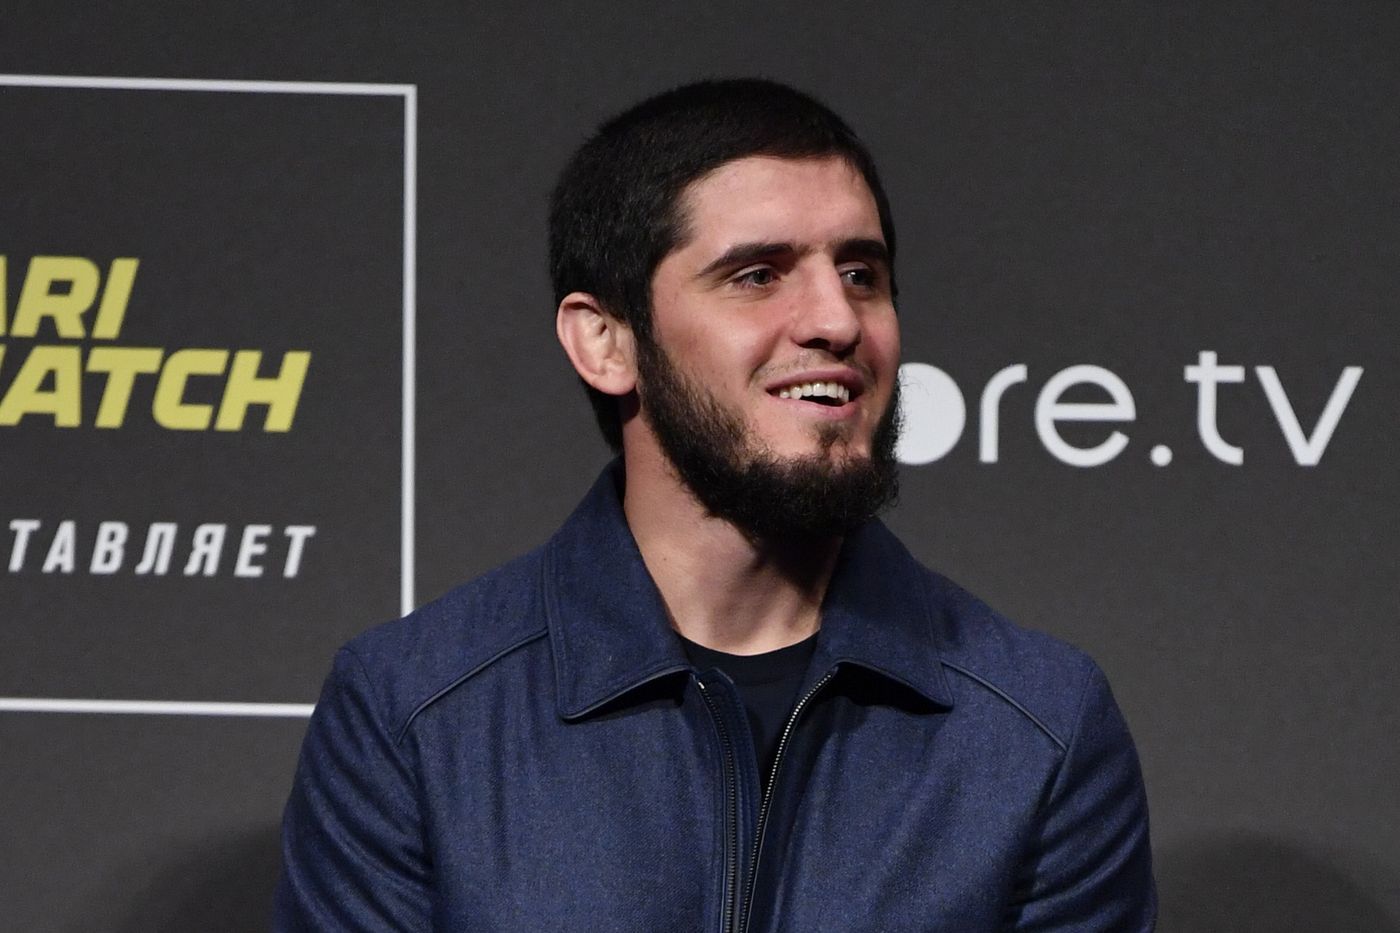 Islam Makhachev vs Drew Dober targeted for UFC 259 on March 6